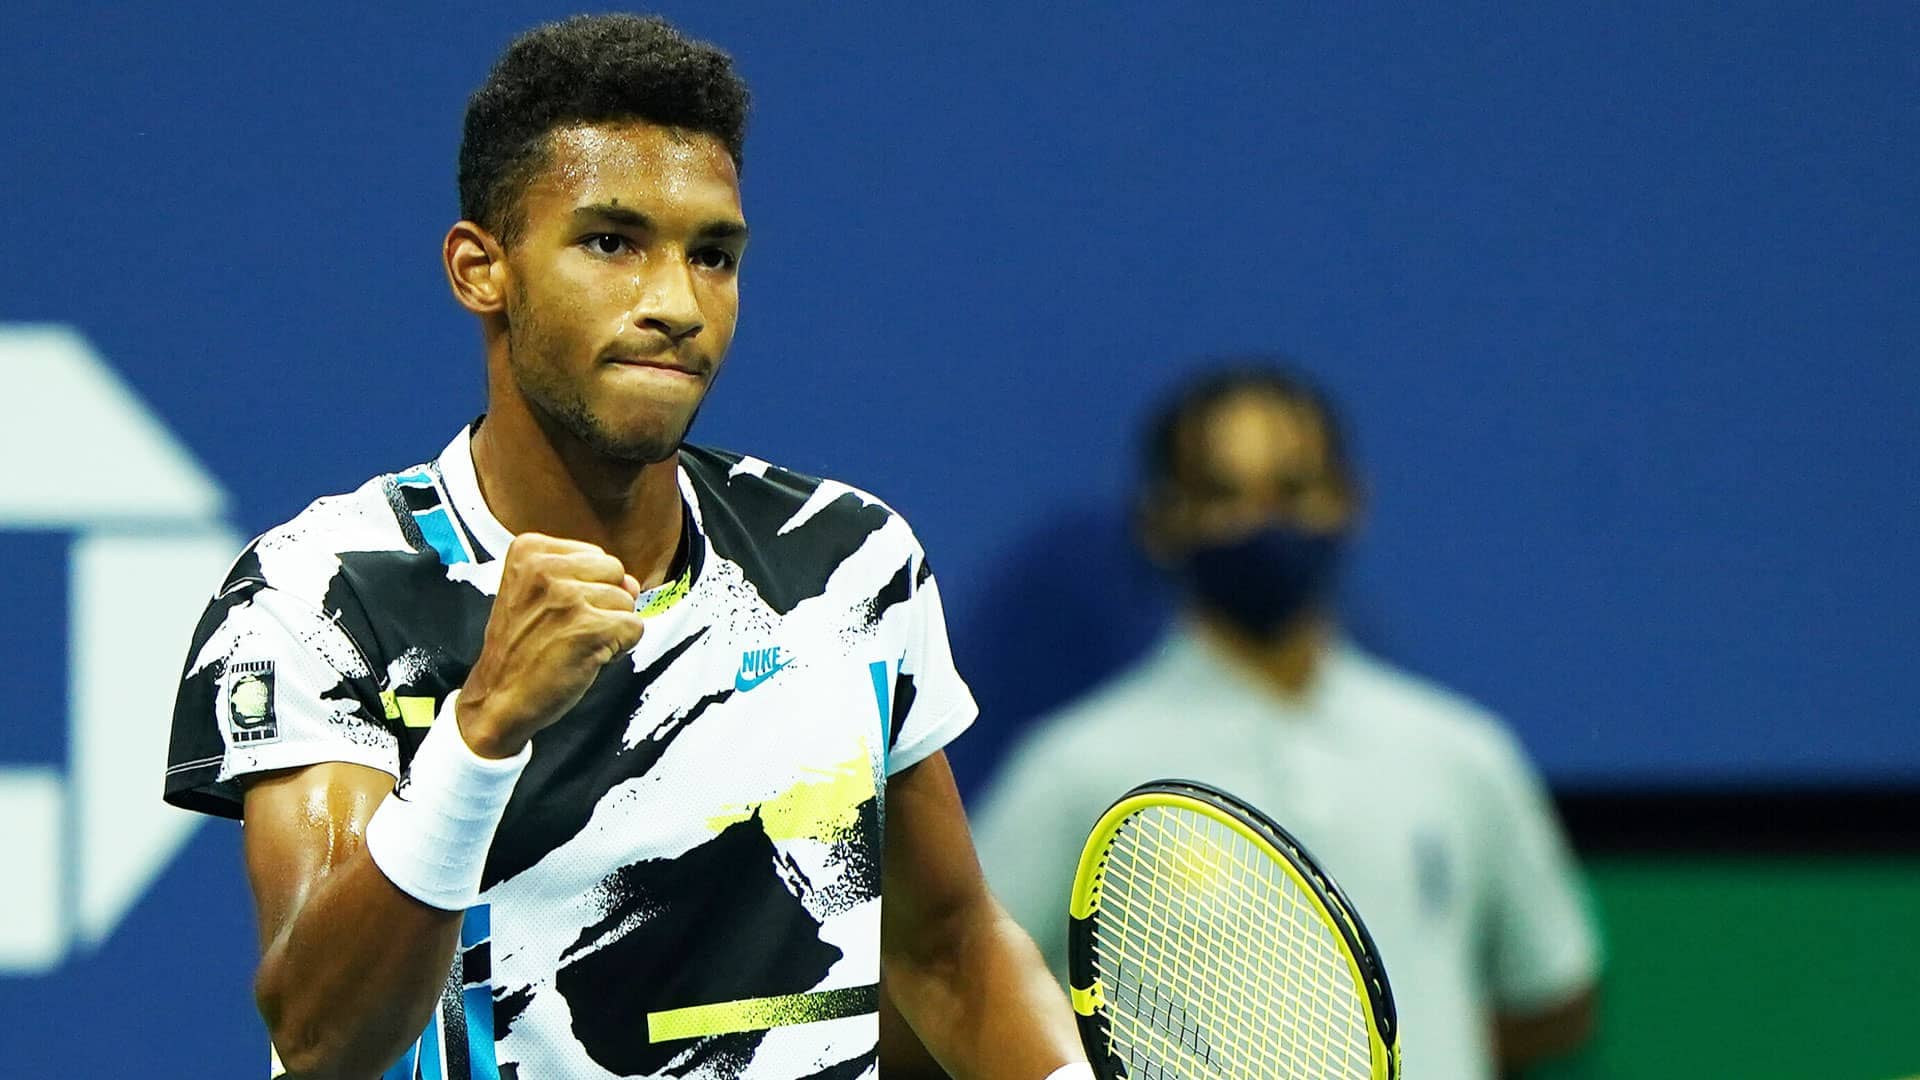 Tennis - Page 4 Auger-aliassime-us-open-2020-day-4-reaction